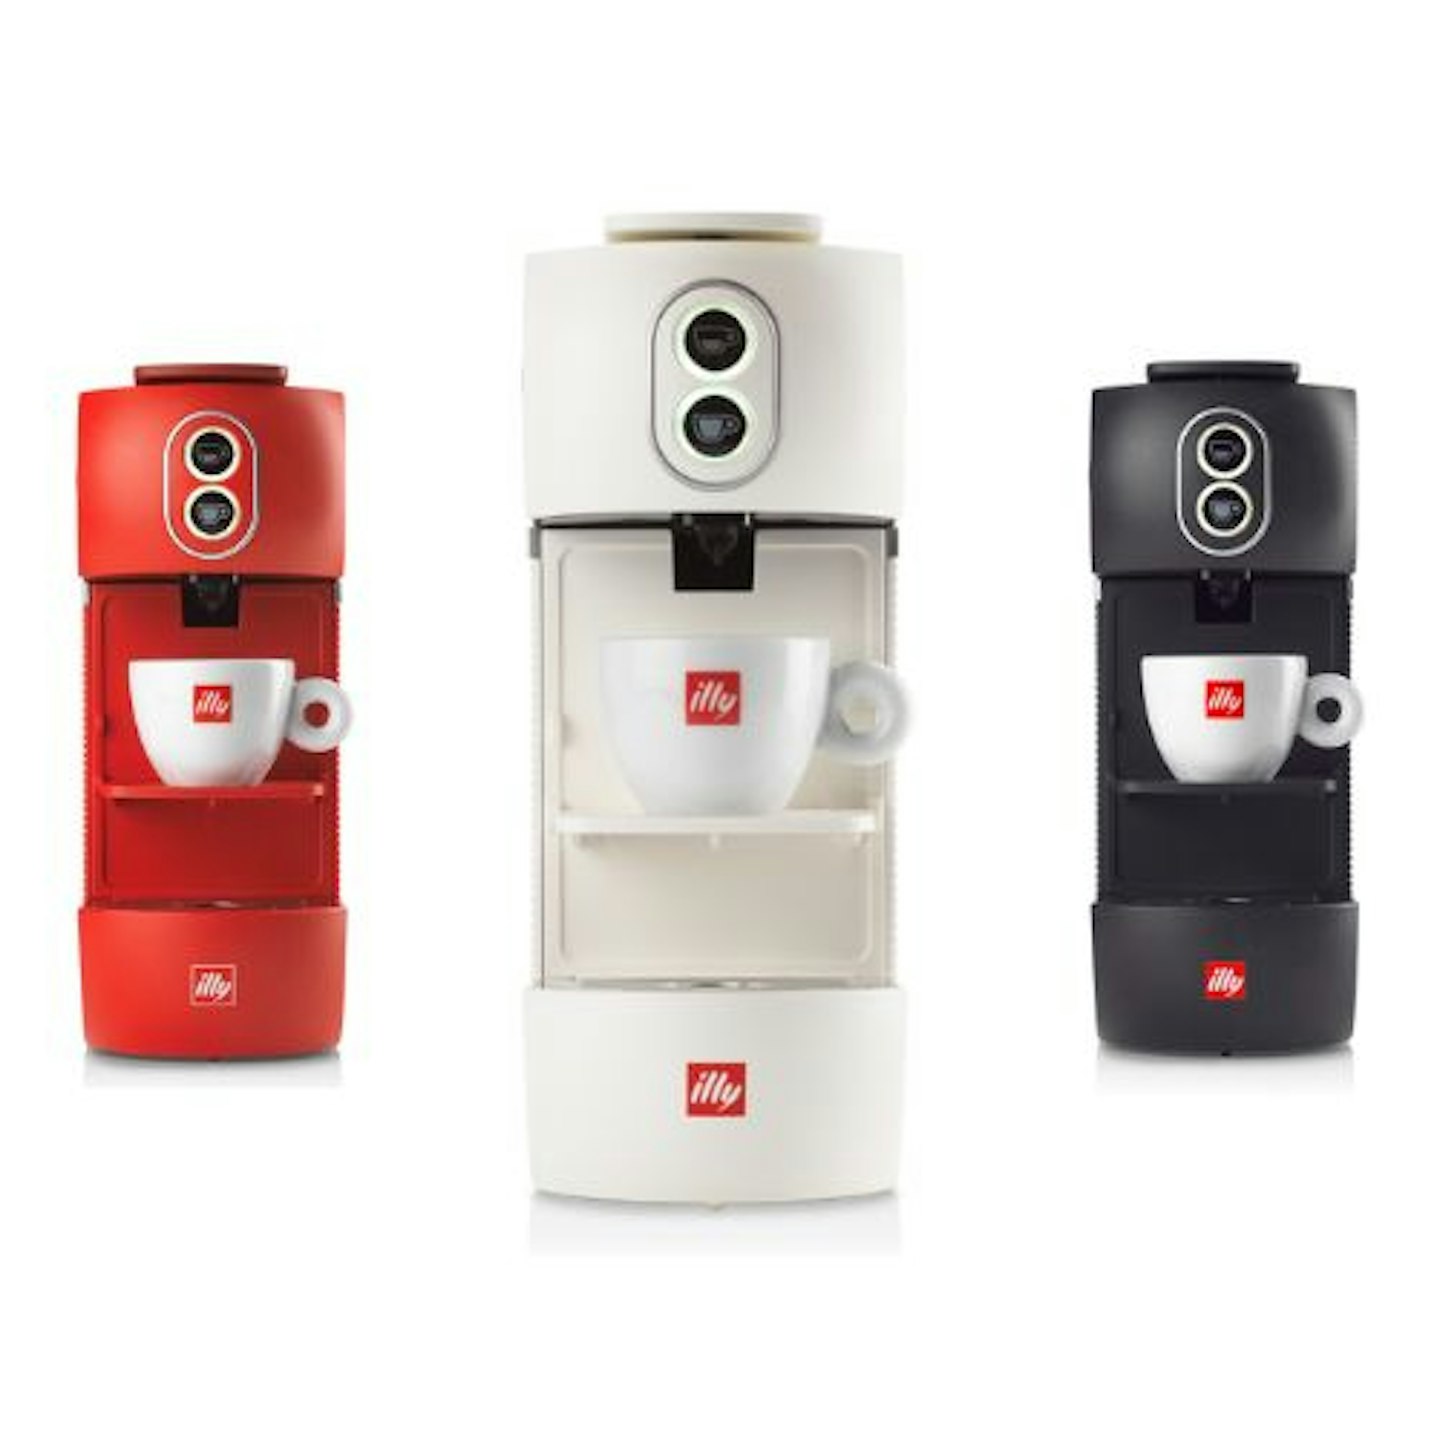 From coffee bean to cup. Innovation and quality coffee - illy